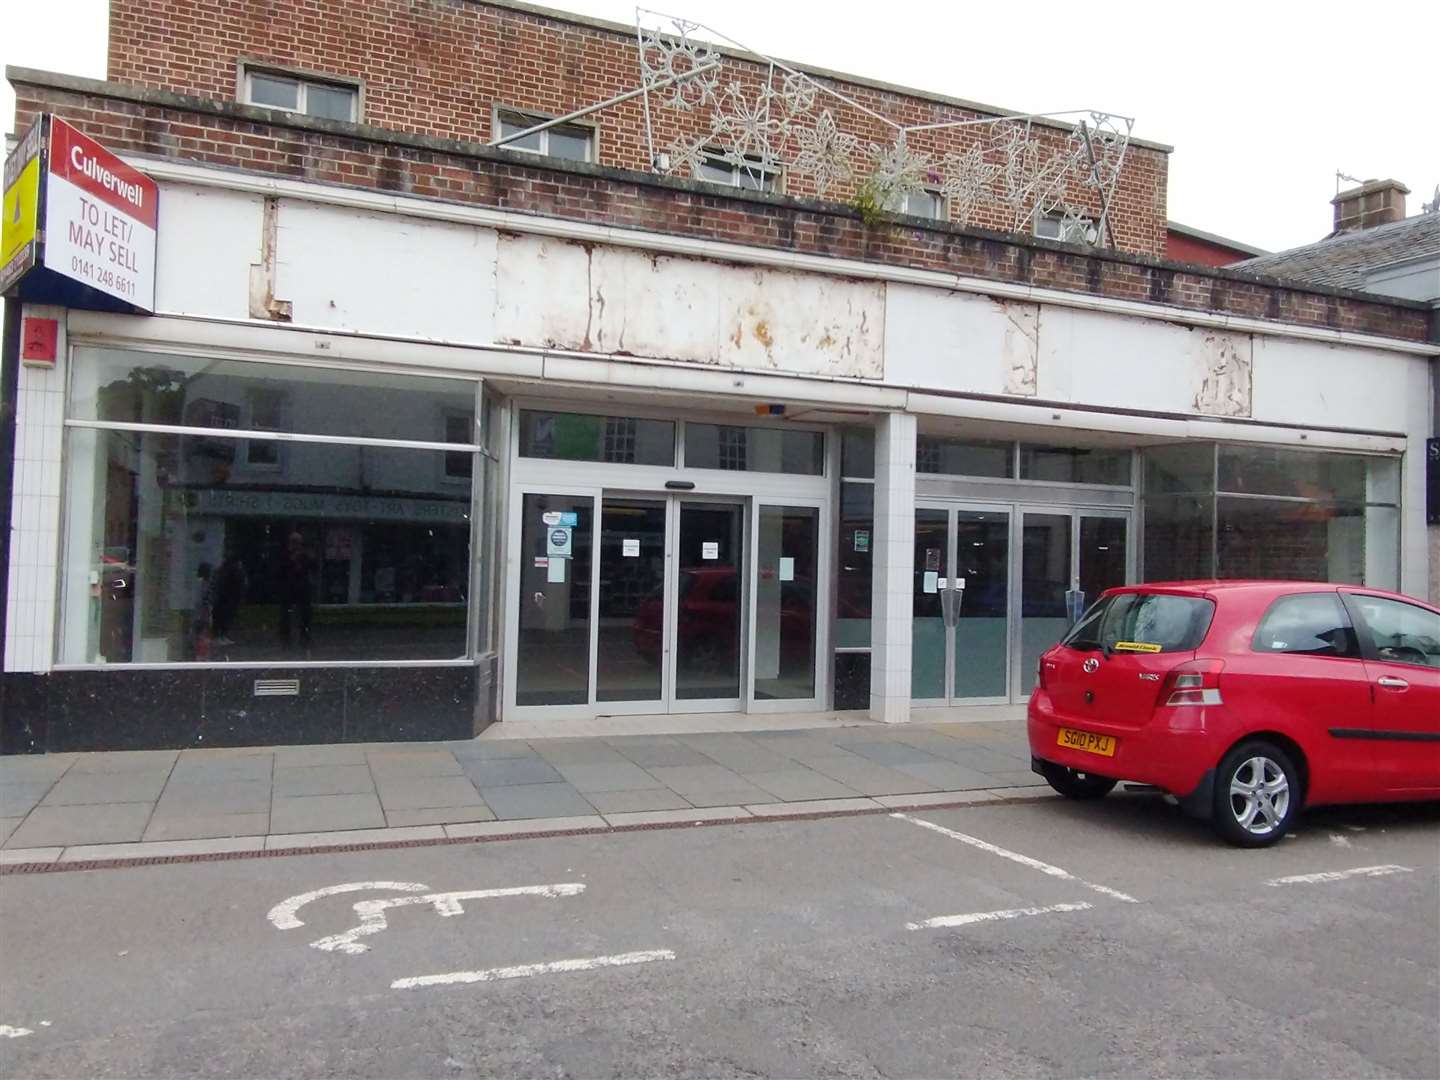 Dingwall is amongst a number of towns where locals would like to see more empty premises being brought back into use.